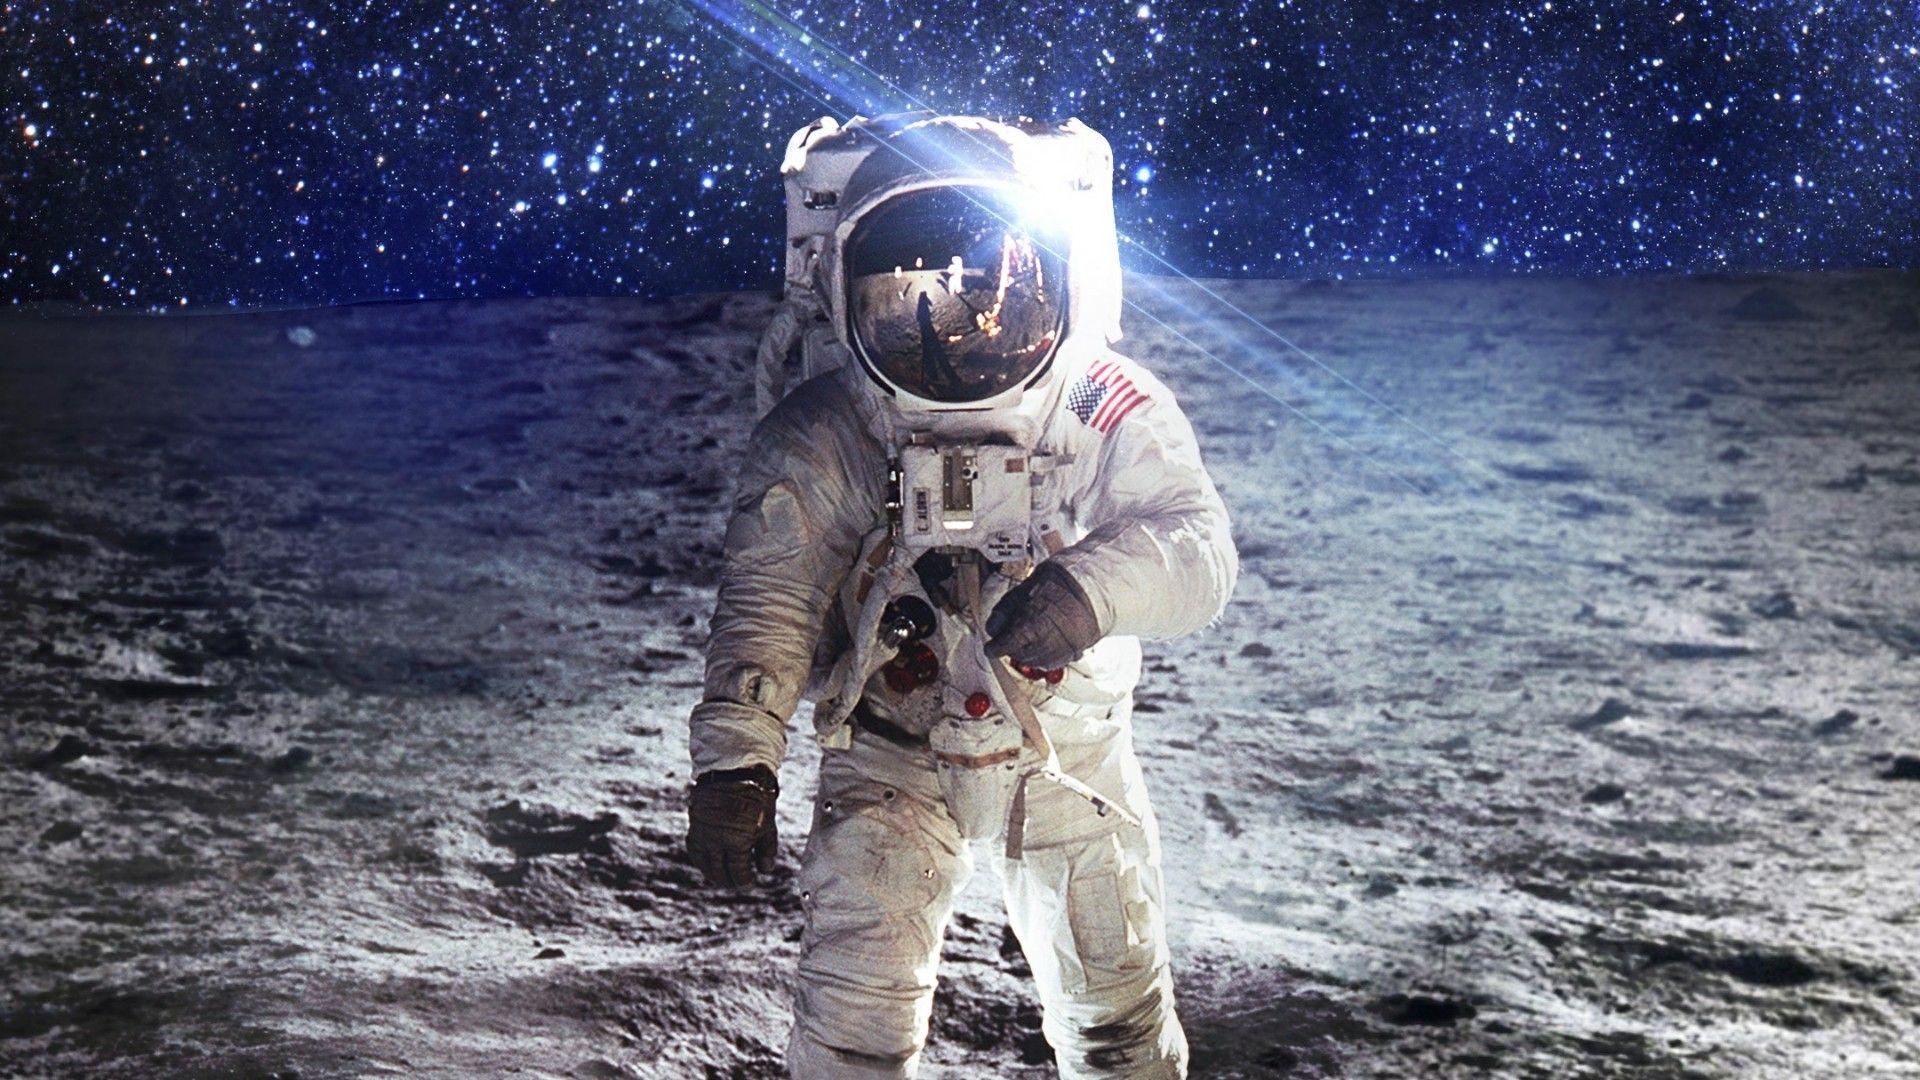 Astronaut On Moon Wallpapers - Top Free Astronaut On Moon Backgrounds